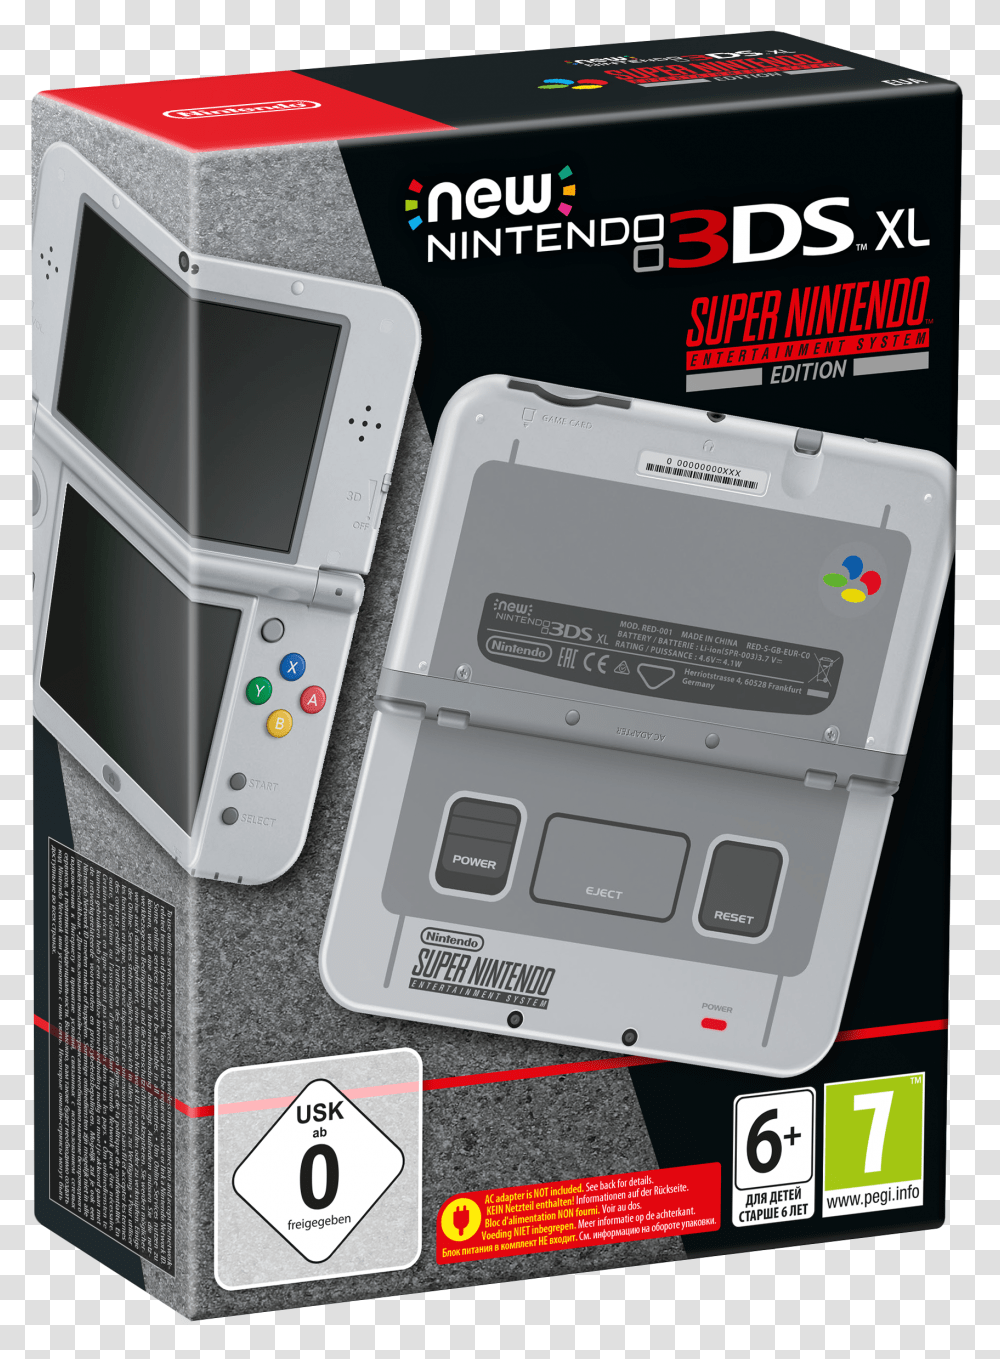 Nintendo 3 Ds Xl Super Nintendo Edition, Mobile Phone, Electronics, Electrical Device, Monitor Transparent Png